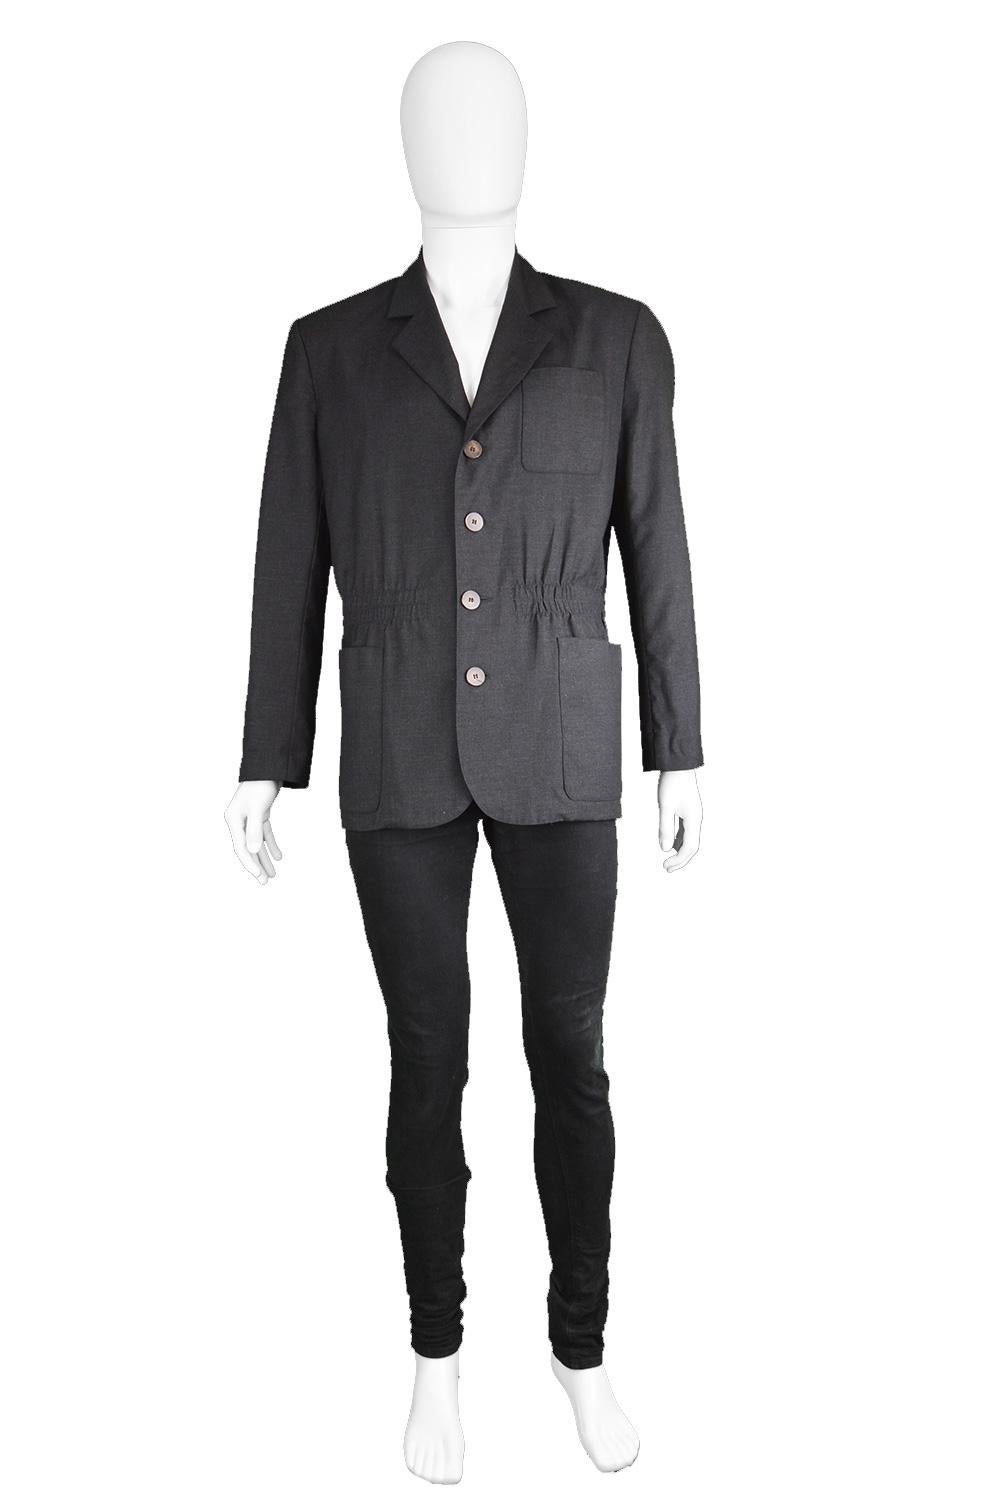 Jean Paul Gaultier Mens Vintage Nipped Waist Black Wool Blazer Jacket, 1990s

Please Click 'Continue Reading' below for full description and size. 

Size: Marked 48 but since the waist isn't as nipped as it was it best fits a men's Medium to Large,